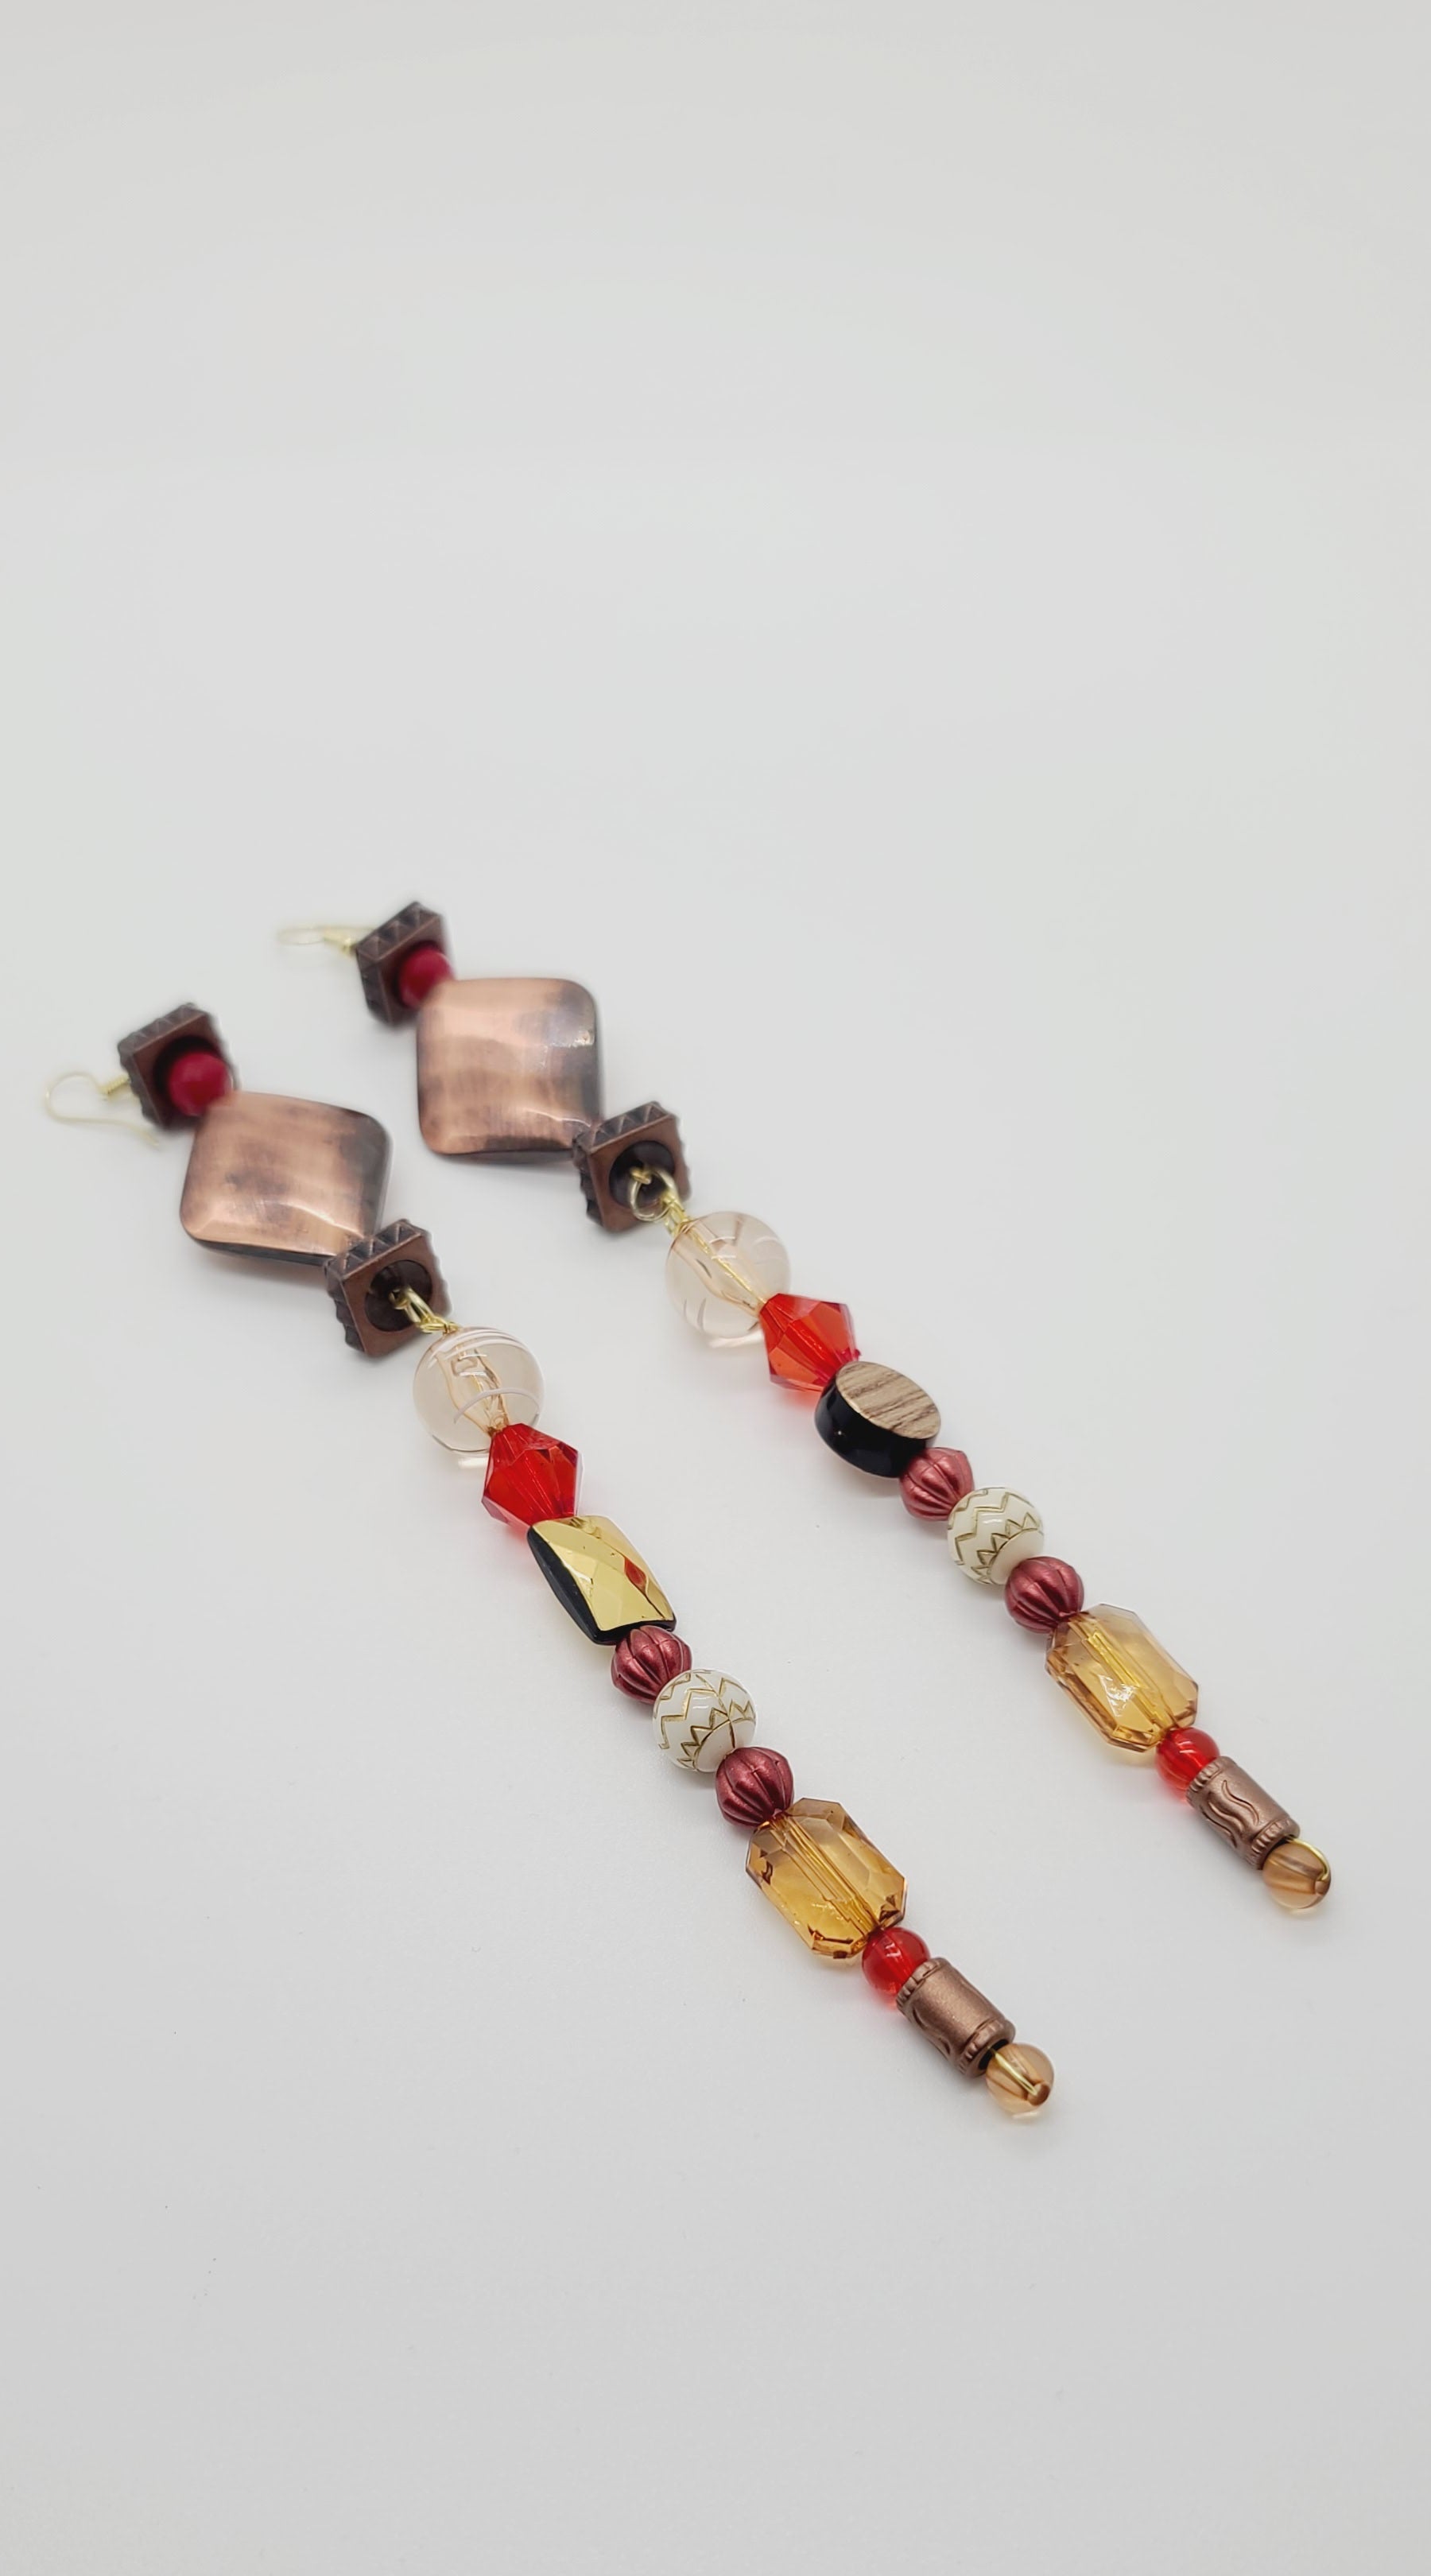 Length: 7 inches | Weight: 1.1 ounces  Distinctly You! These earrings are made with diamond-shaped copper charm, copper square rondelles, 6mm red glass faceted beads,10mm red faceted resin beads, 12mm clear and white glass beads, 10mm clear gold emerald cut beads, 6mm copper beads, 8mm gold carved white beads, copper spacers, 4mm red and tan beads.